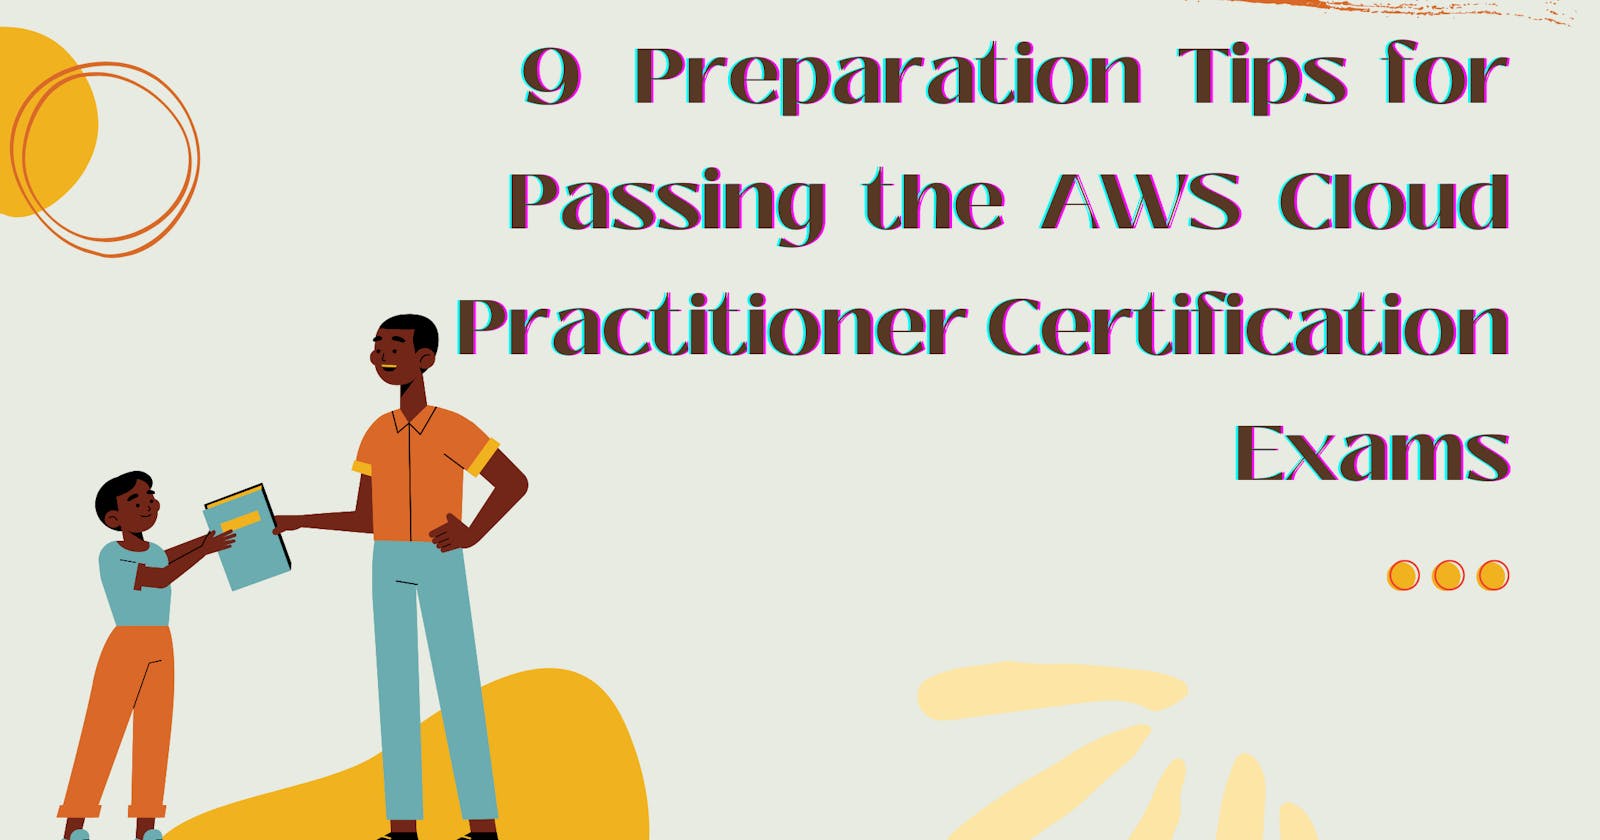 9 Preparation Tips for Passing the AWS Cloud Practitioner Certification Exams